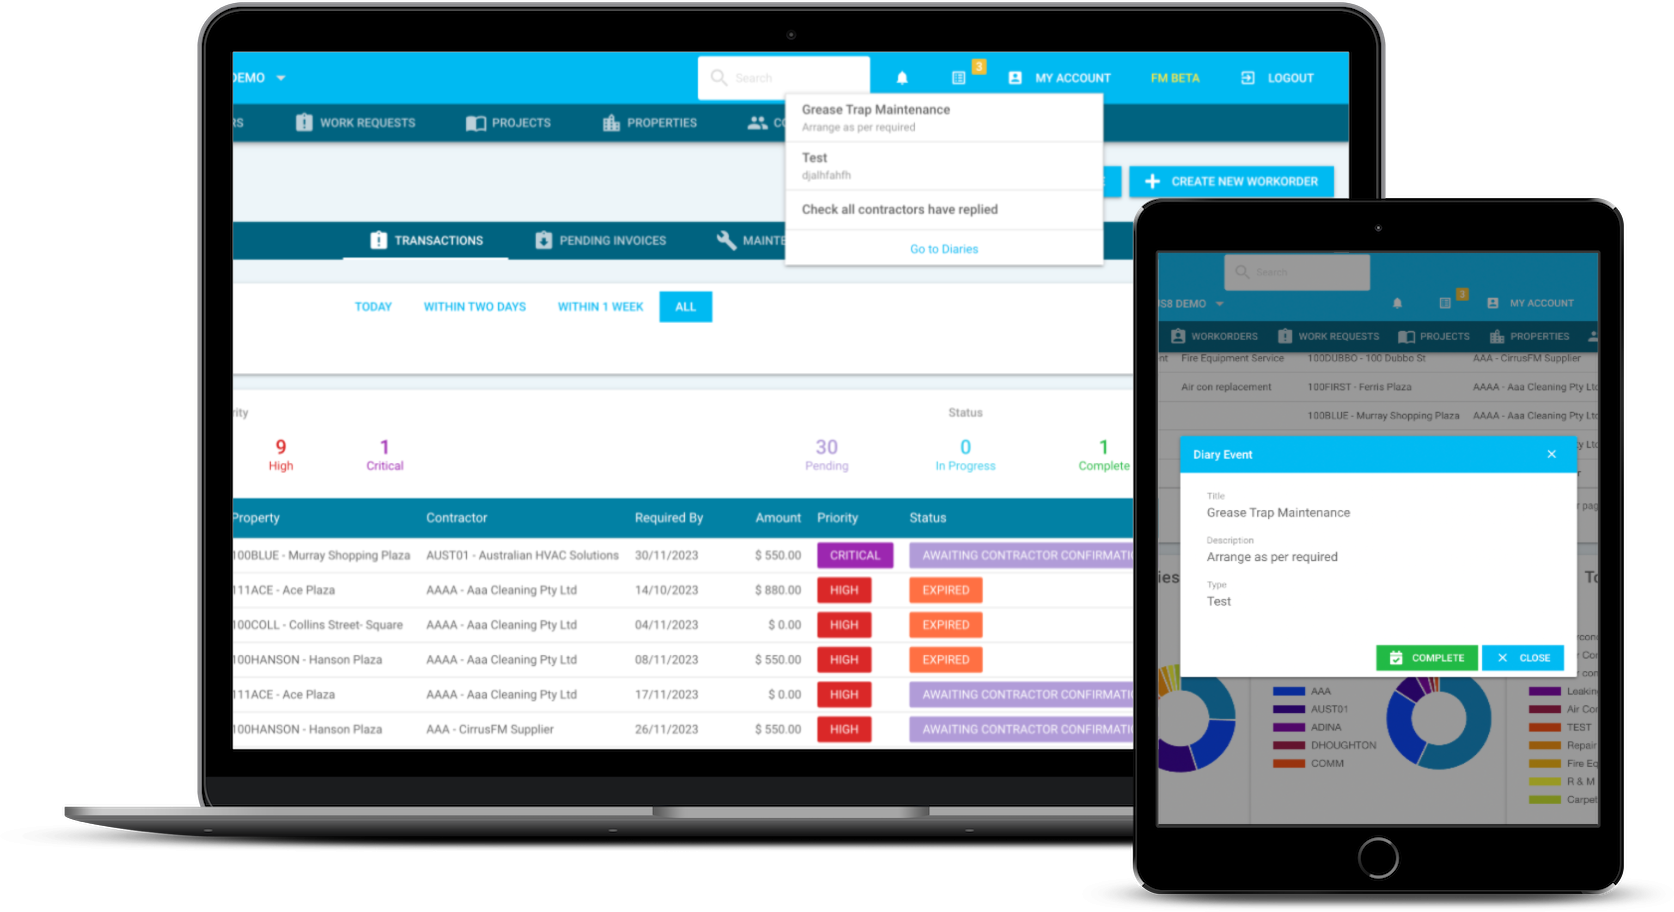 With a fully integrated facilities management FM module, all your physical management tasks sync back to the main system, adding hours of saved time to your day. Generate work orders, control payments and manage contractor compliance seamlessly.